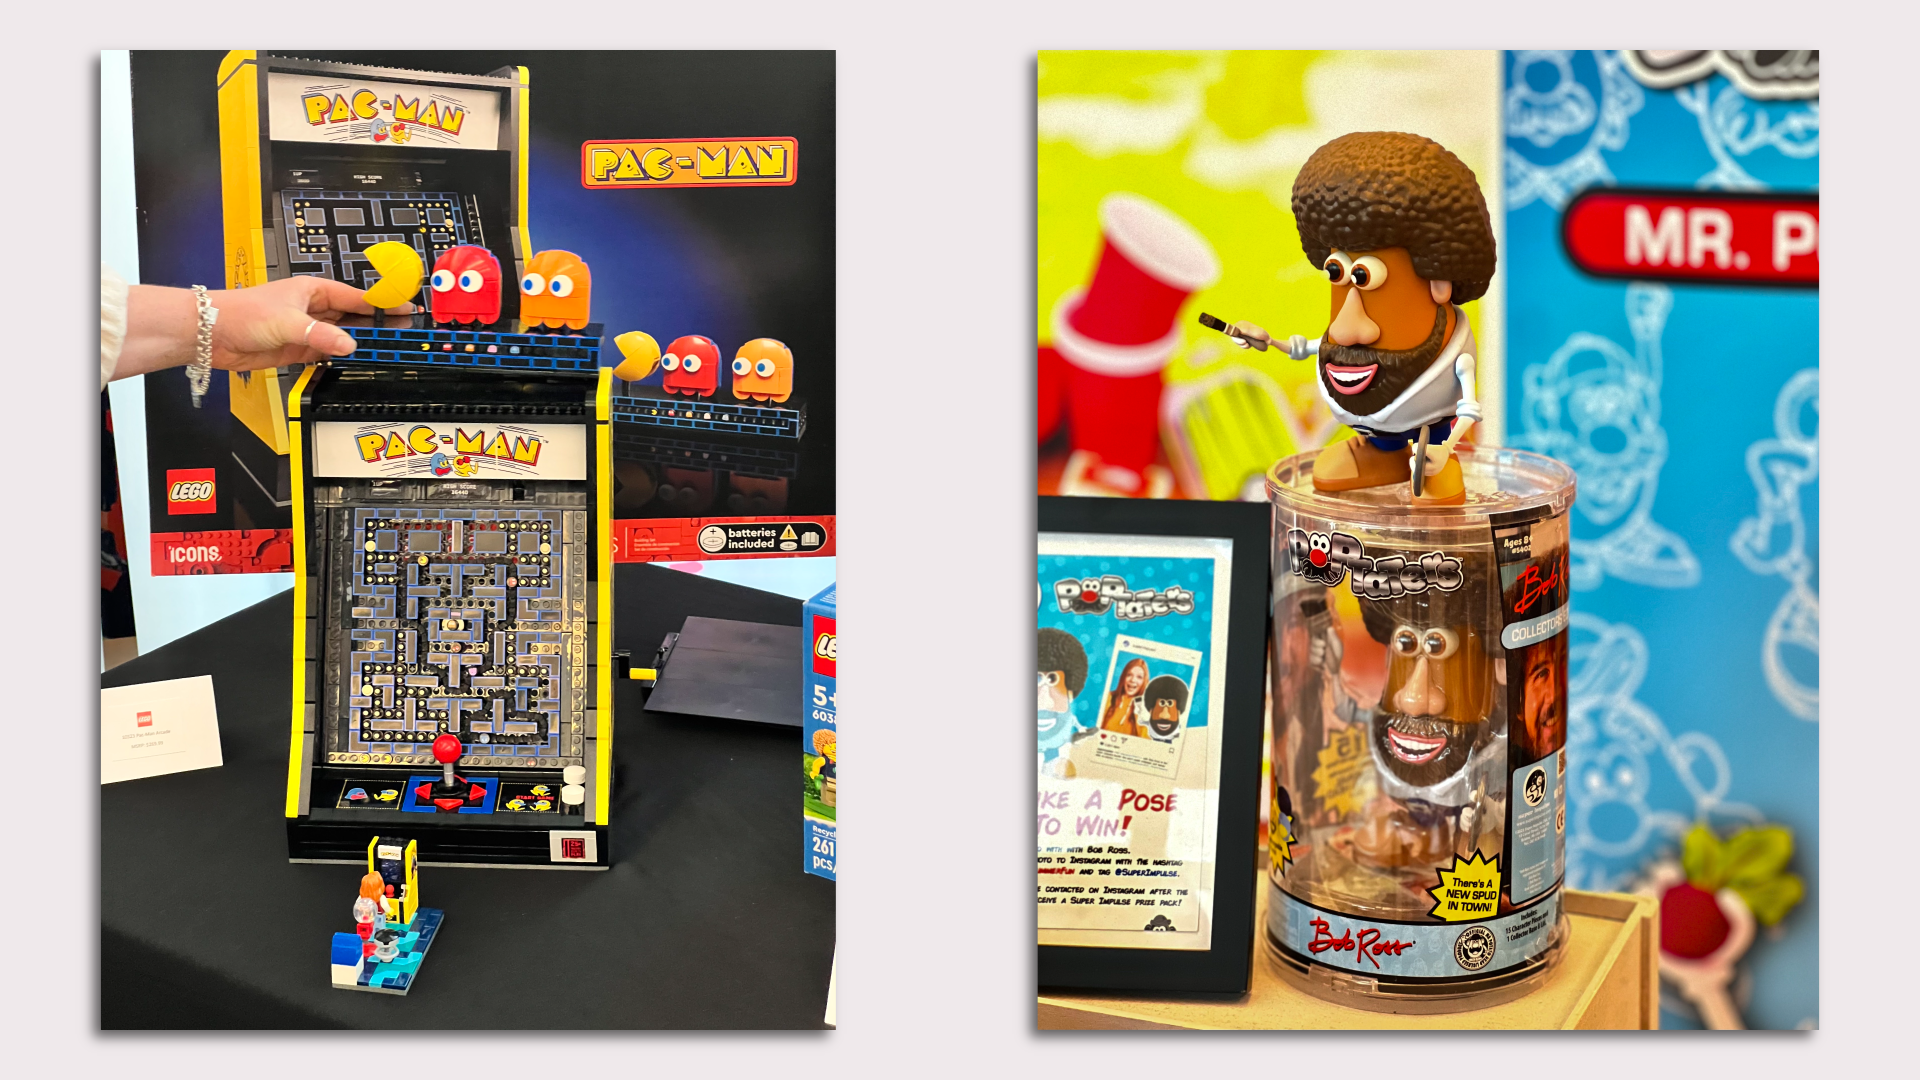 At left, a Pac-Man Lego set; at right, a Bob Ross figurine.